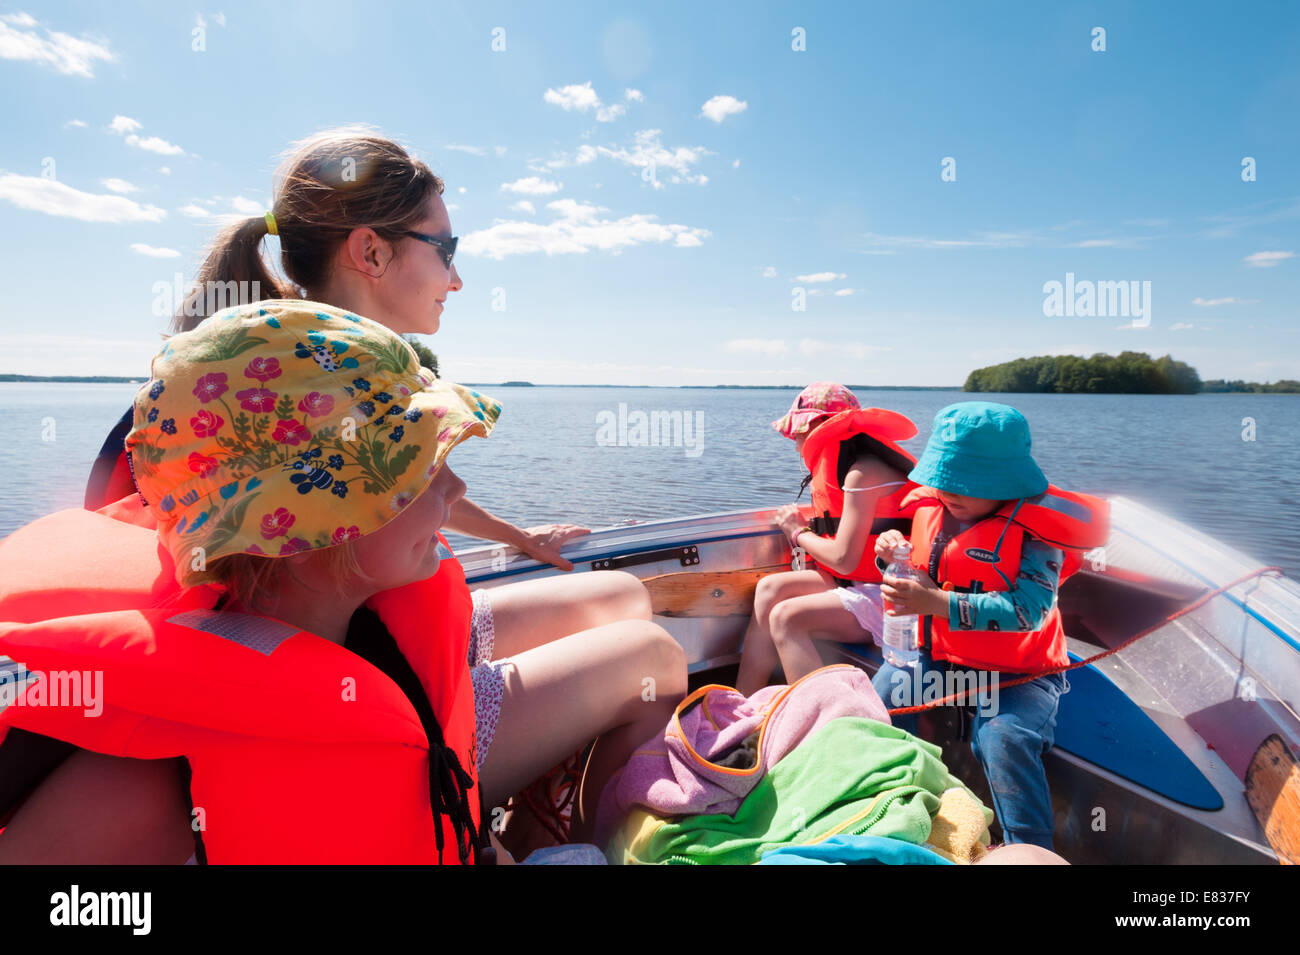 Mom with kids on a small boat Stock Photo